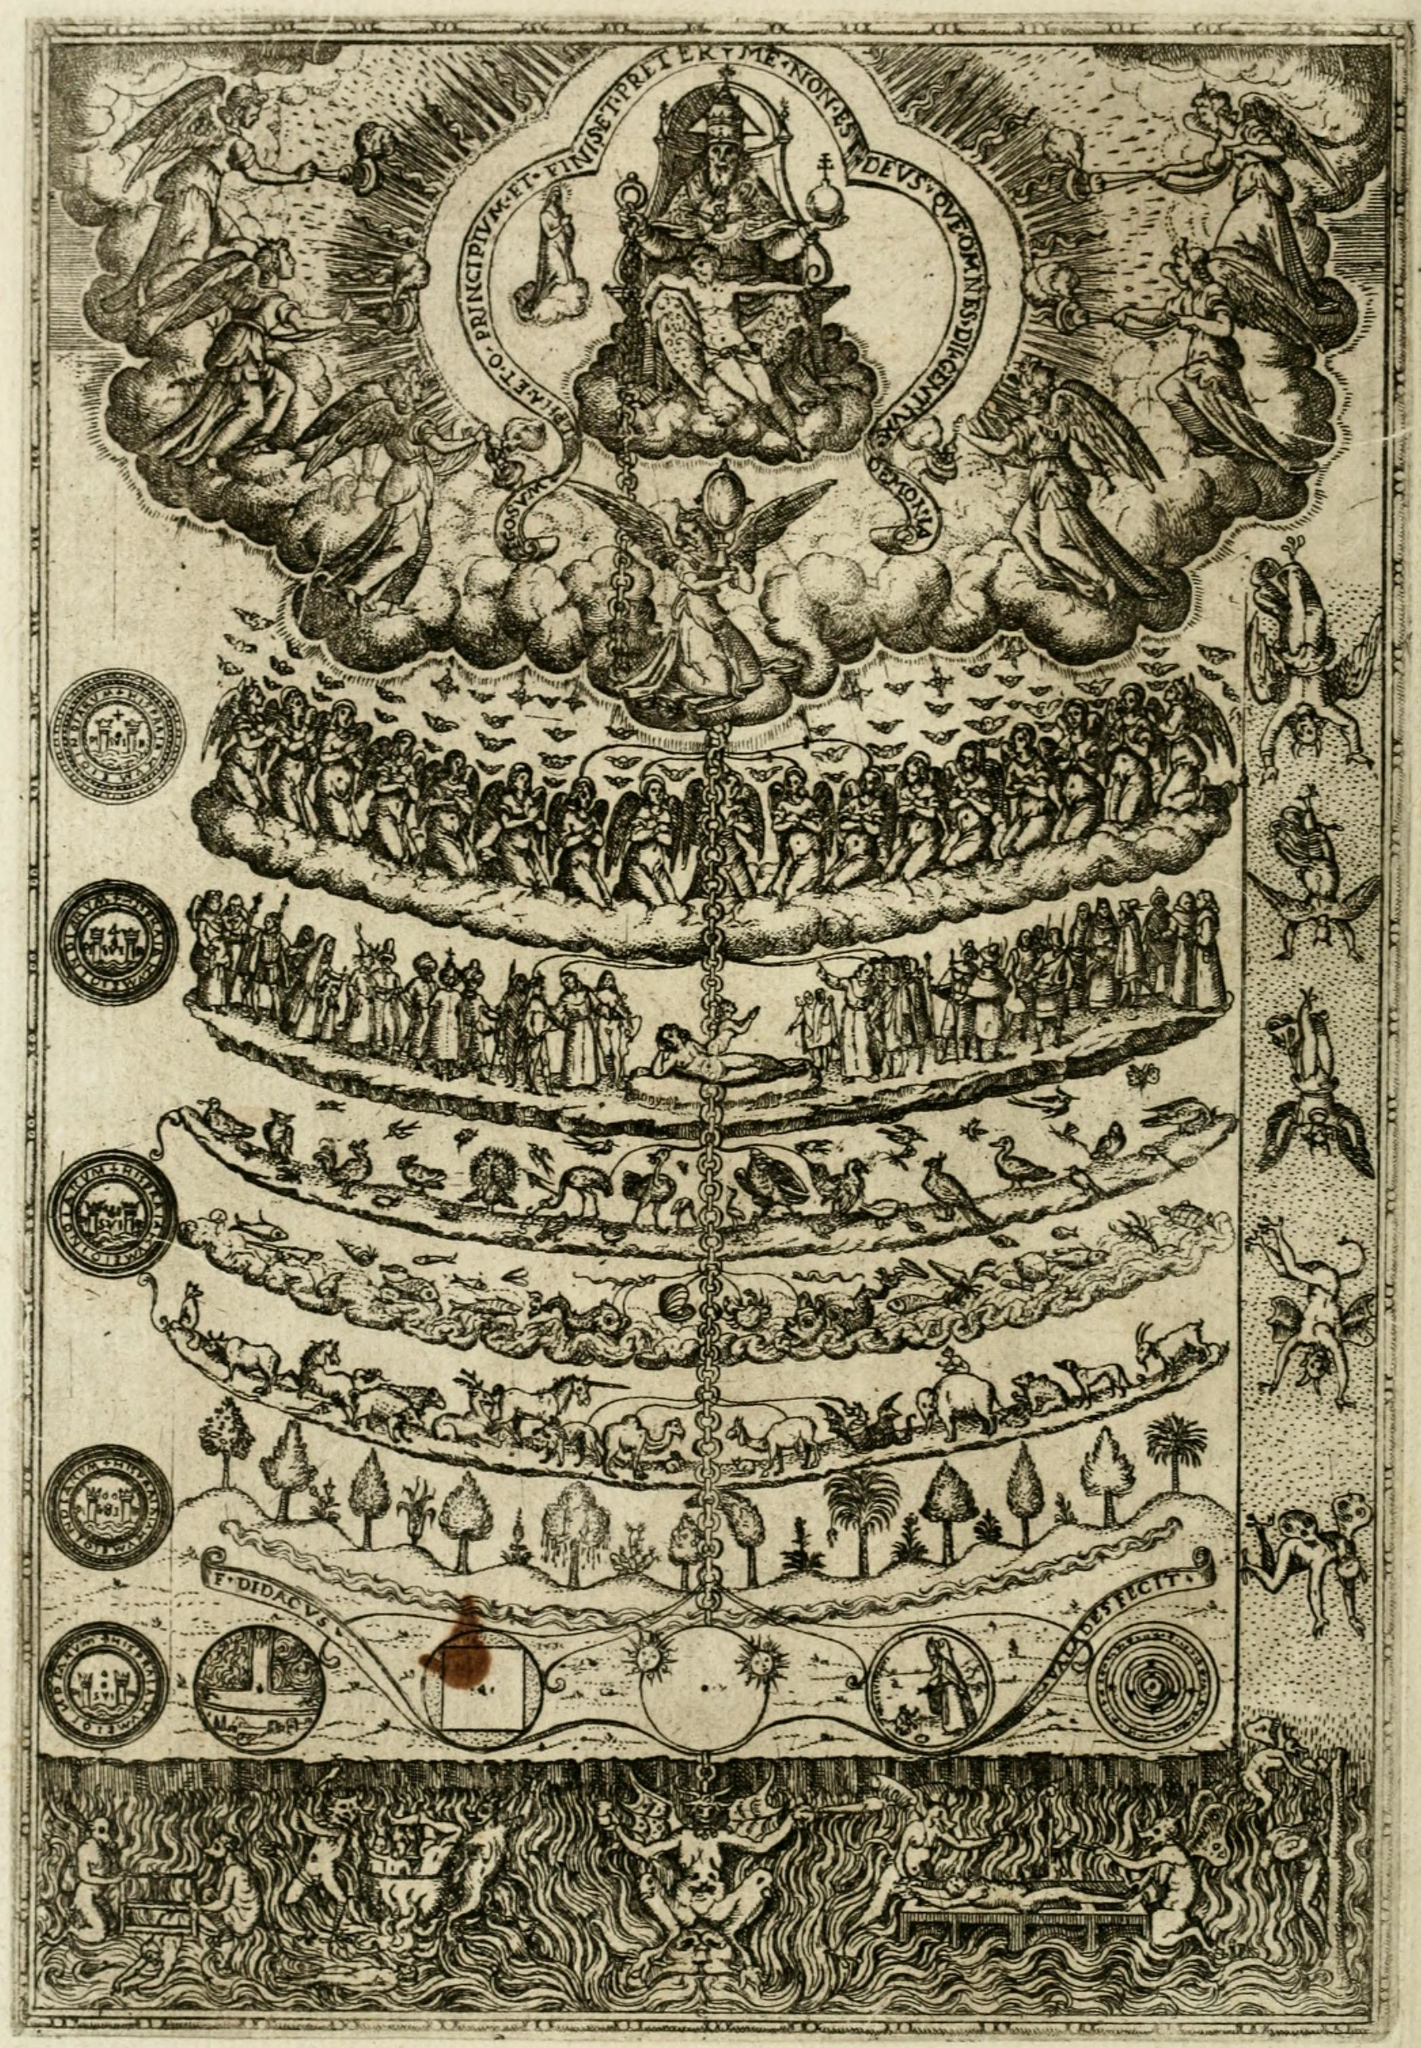 Rows of organisms, with plants and animals at the bottom and humans, angels, and God at top.